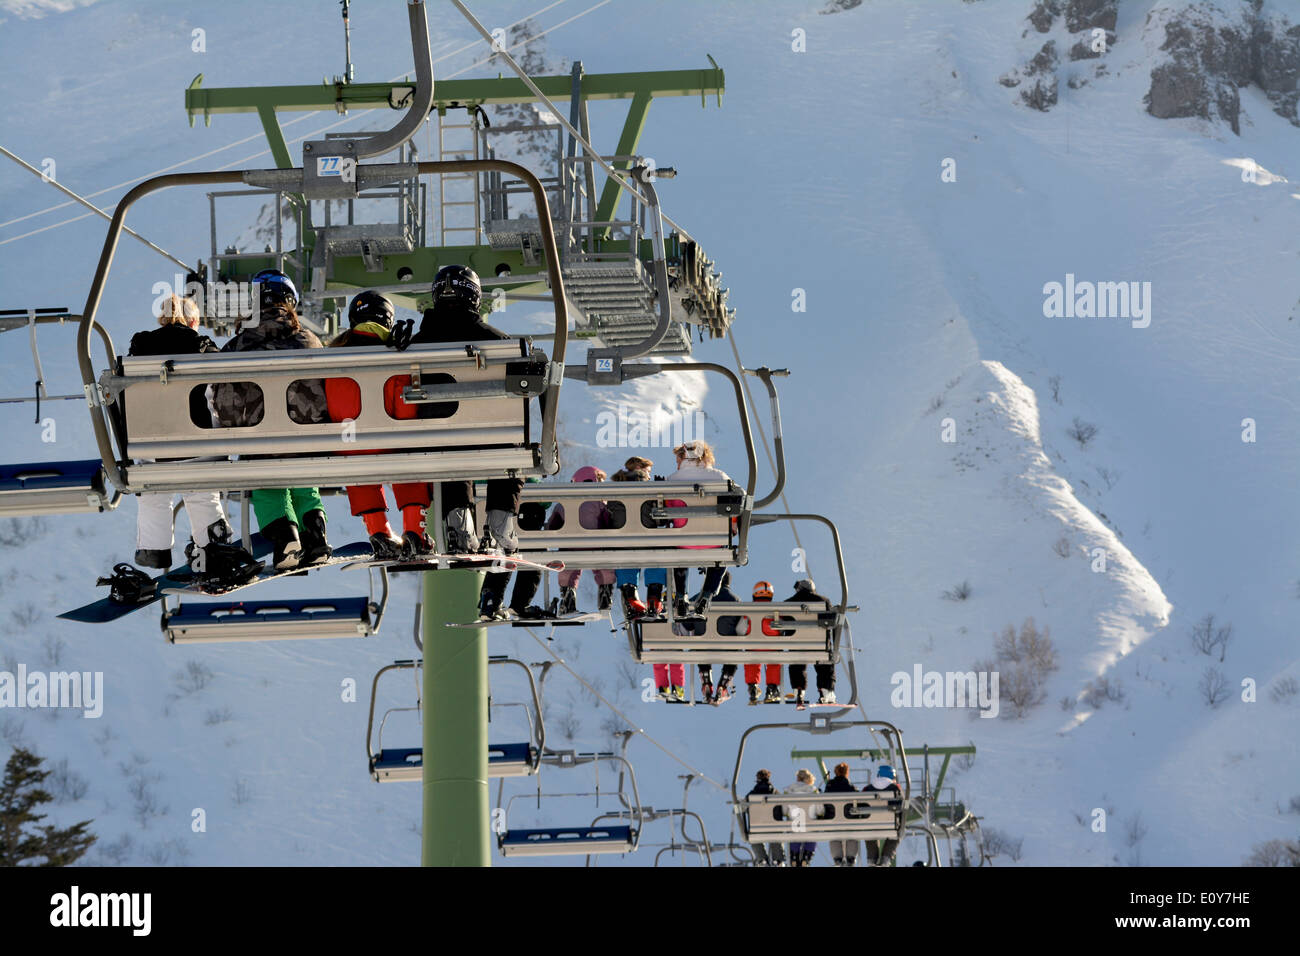 Row of chairlifts. Le Mont Dore ski resort. Auvergne. France Stock Photo